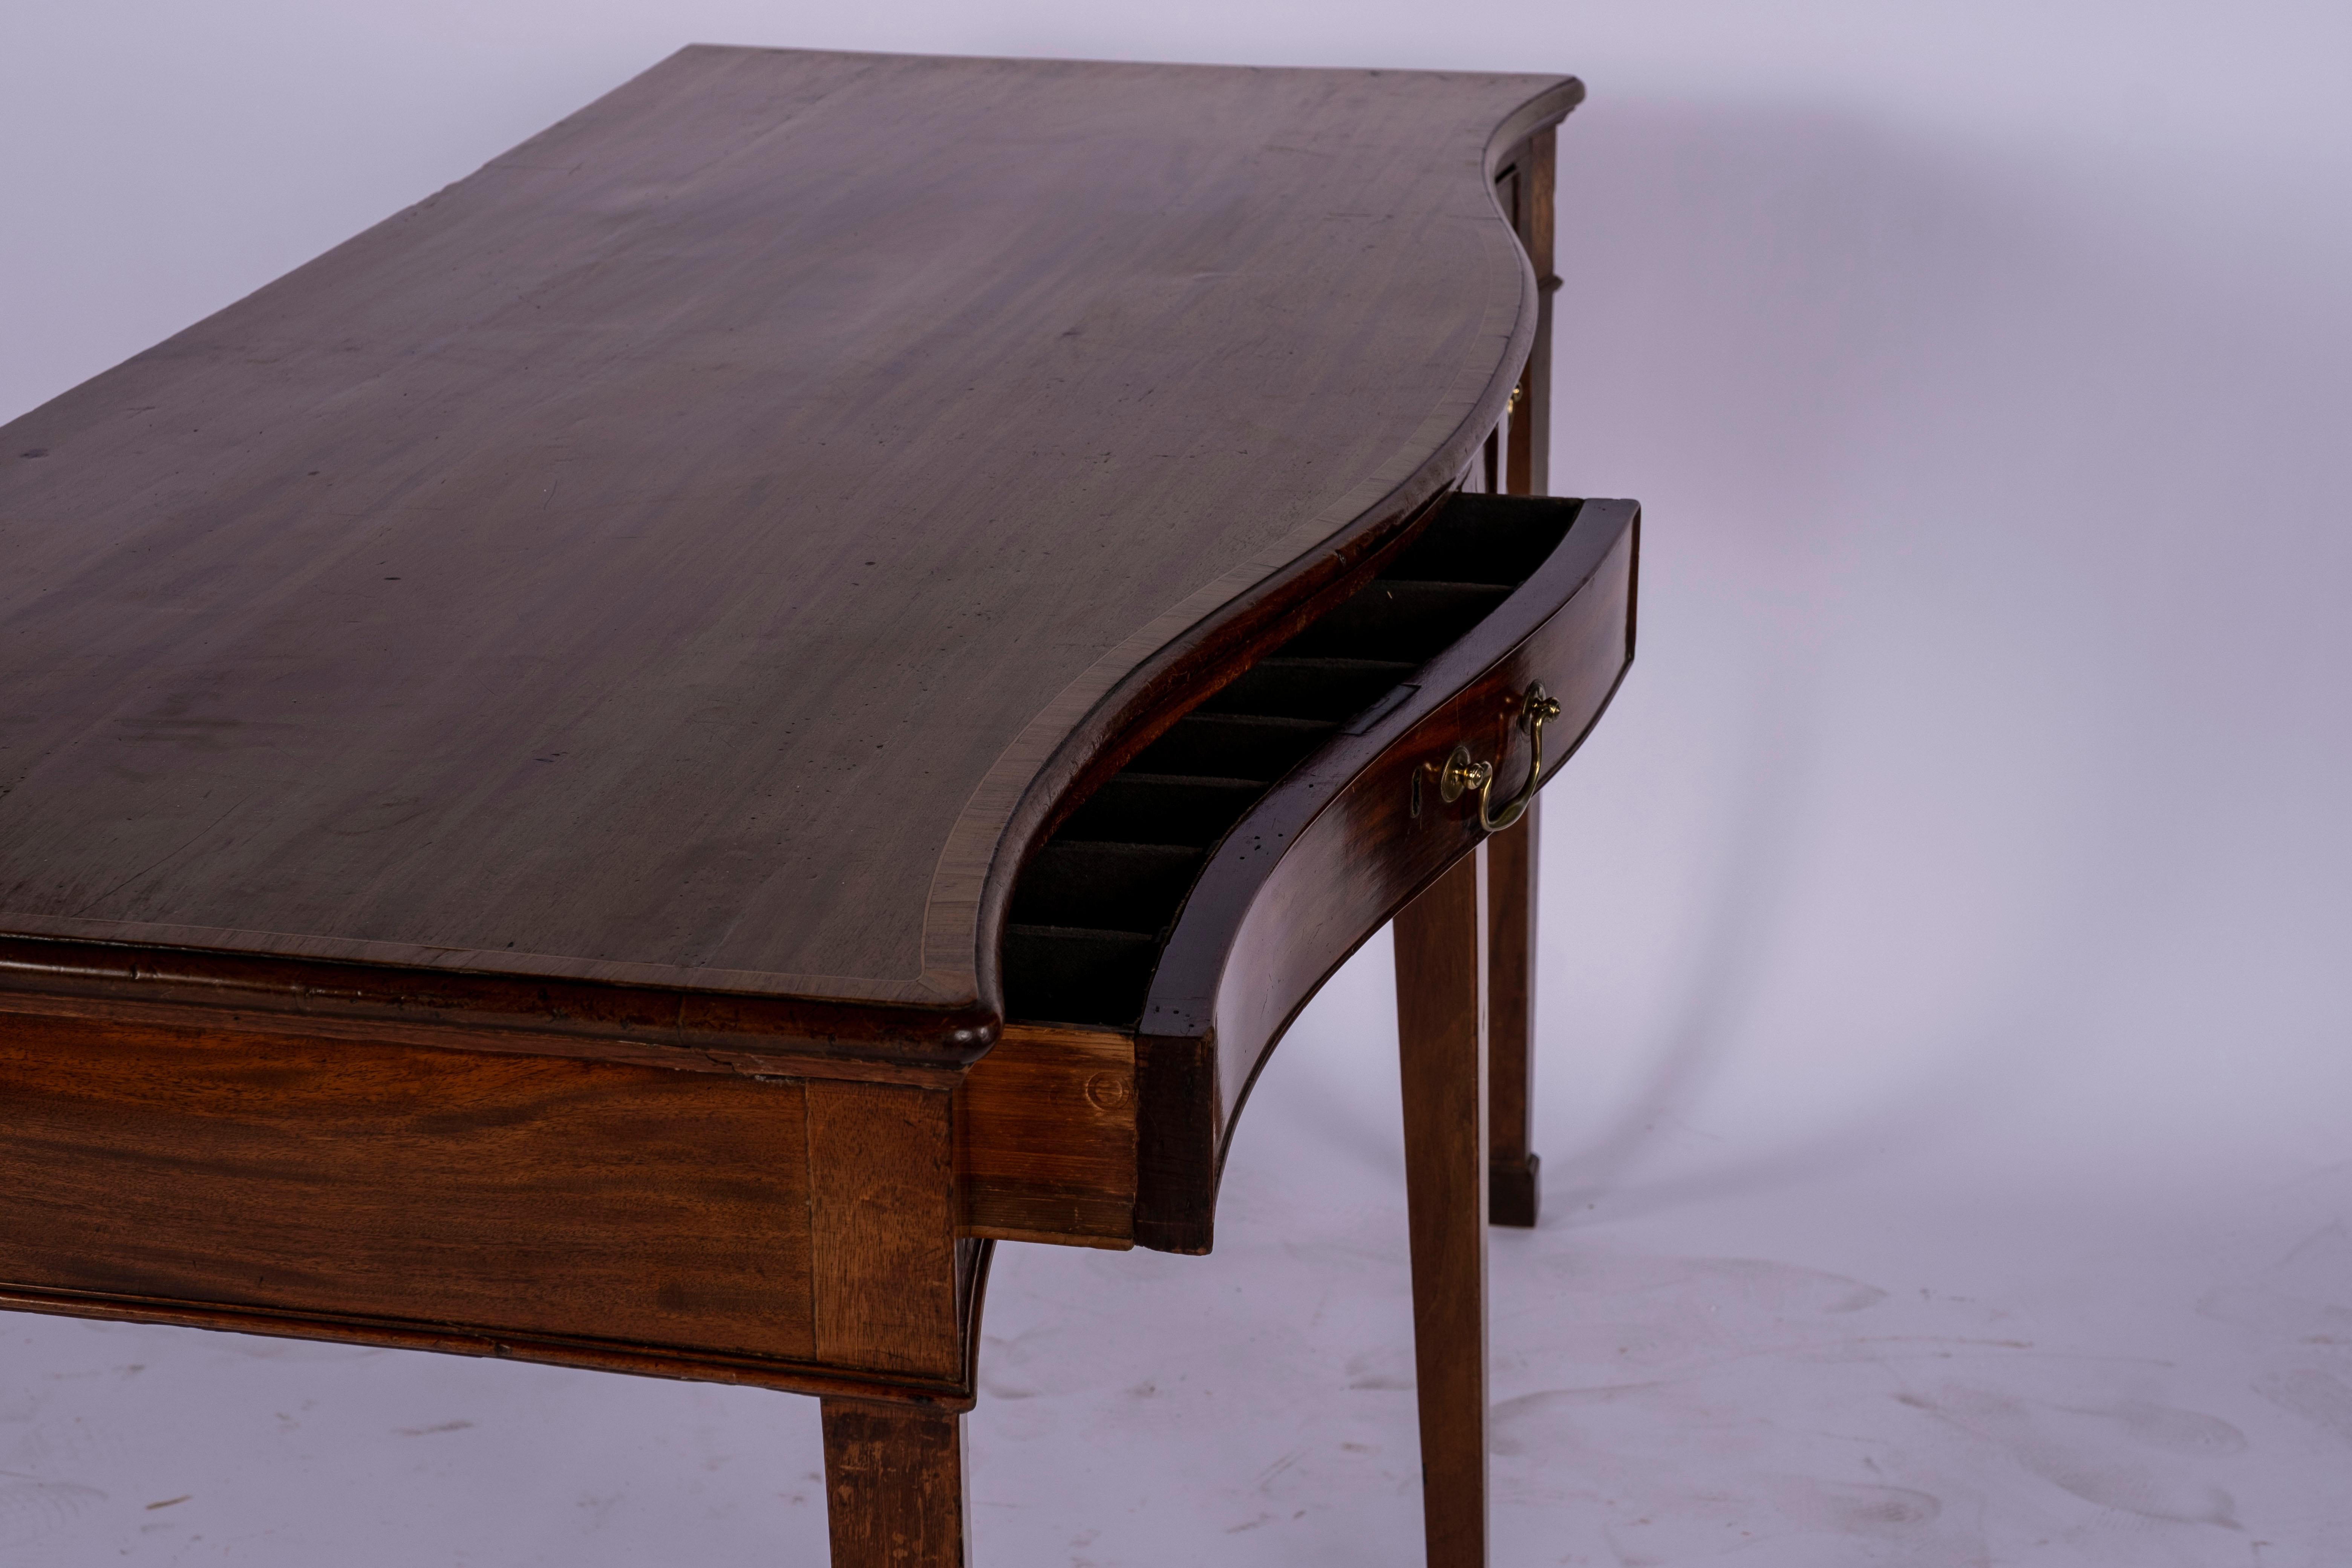 Inlaid mahogany George III serpentine front huntboard with two drawers fitted for flatware with silver cloth. Detailed with Conch shell and banded inlay on squared tapered legs ending in spade feet. Burn marks on top, split on either side of conch